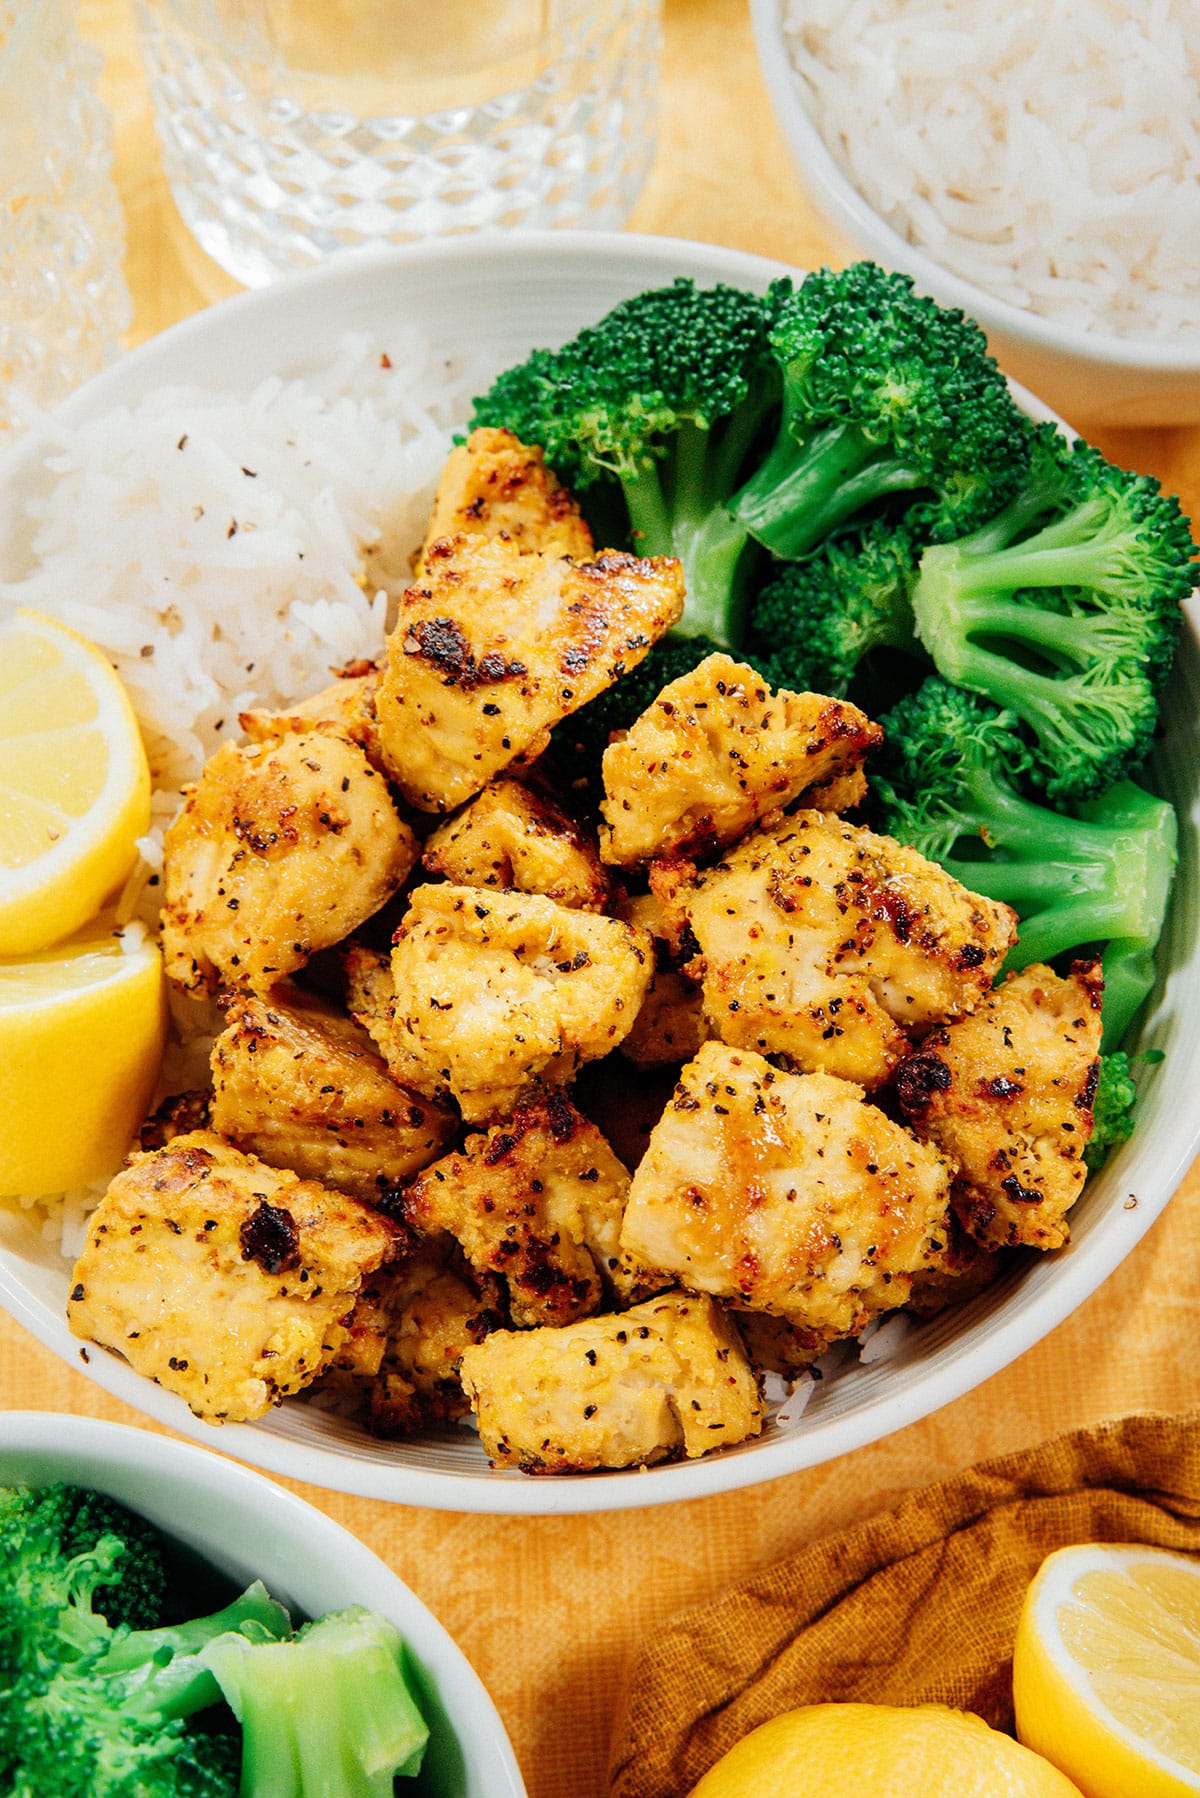 Lemon pepper tofu in a bowl with rice and broccoli.